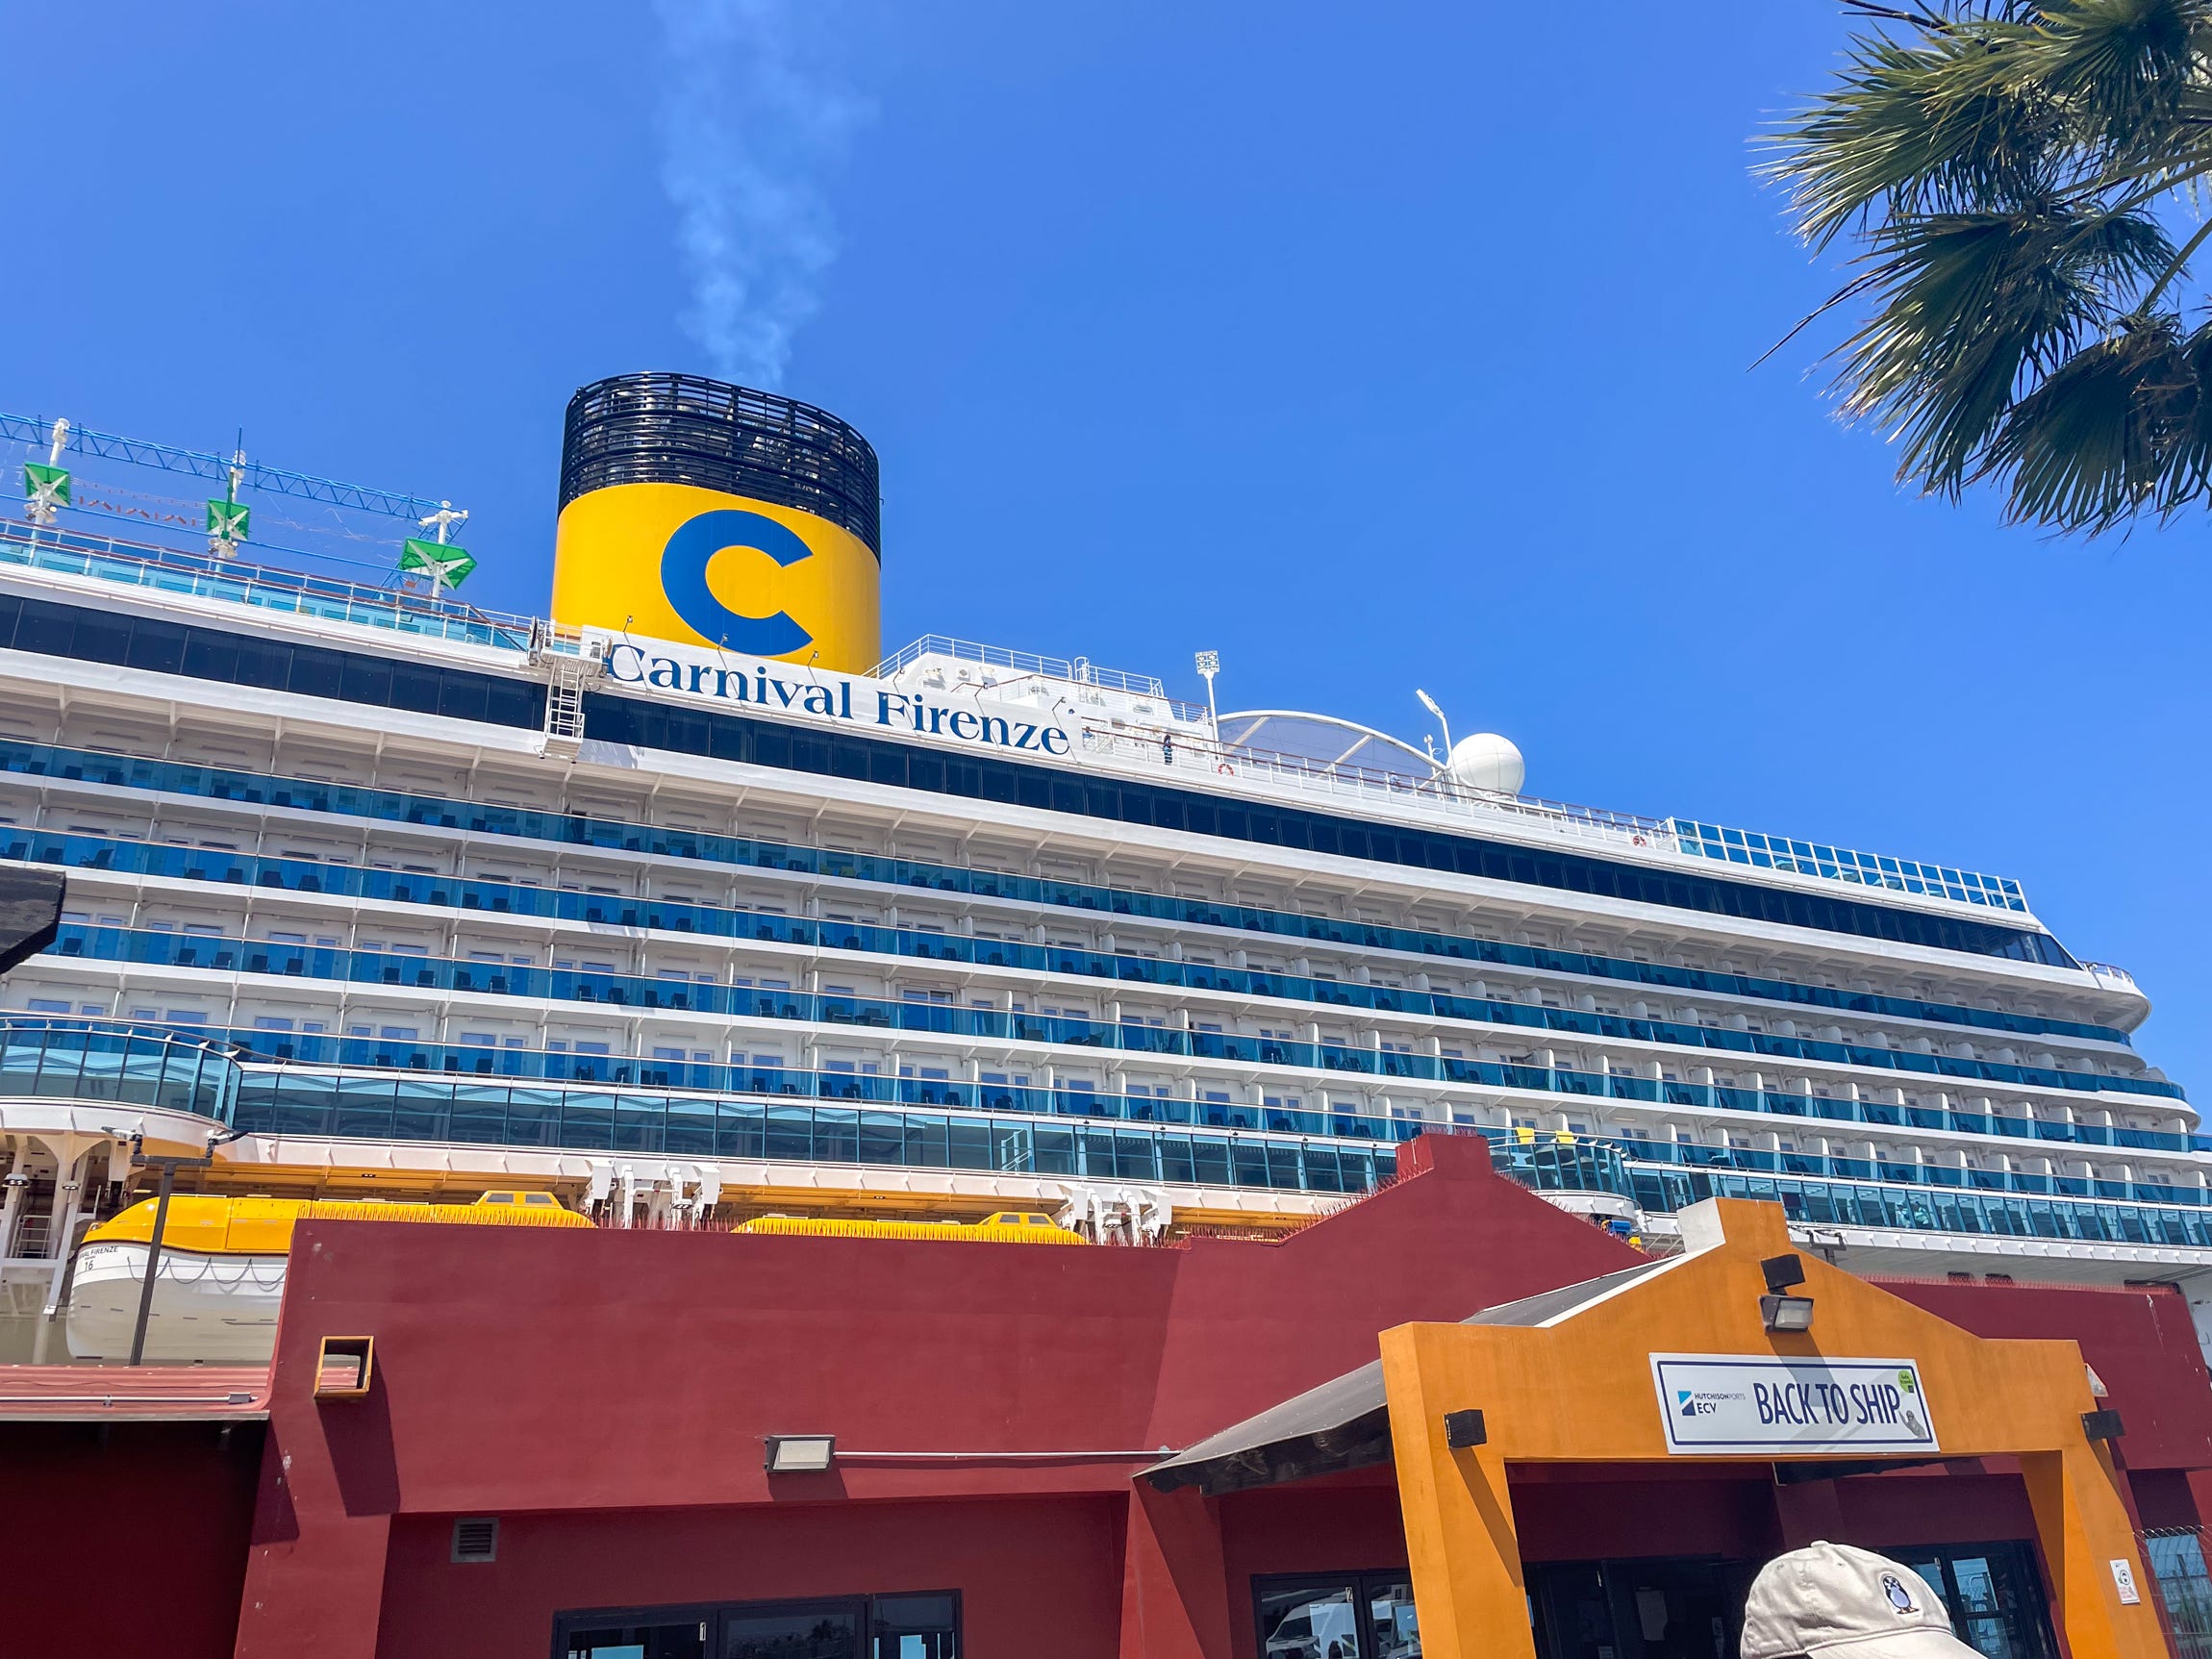 <p>I admittedly don't have the best sense of direction. It didn't help that there were no signs pointing guests to where they could disembark the ship.</p><p>A crew member even accidentally led me in the wrong direction, seemingly unsure of where to go, too.</p><p>I wasn't annoyed. Firenze is a 1,061-foot-long vessel, after all.</p><p>However, I was annoyed when I stepped off Firenze in Ensenada, Mexico, and saw that the provided portside bus to downtown would cost another $4 per person.</p>